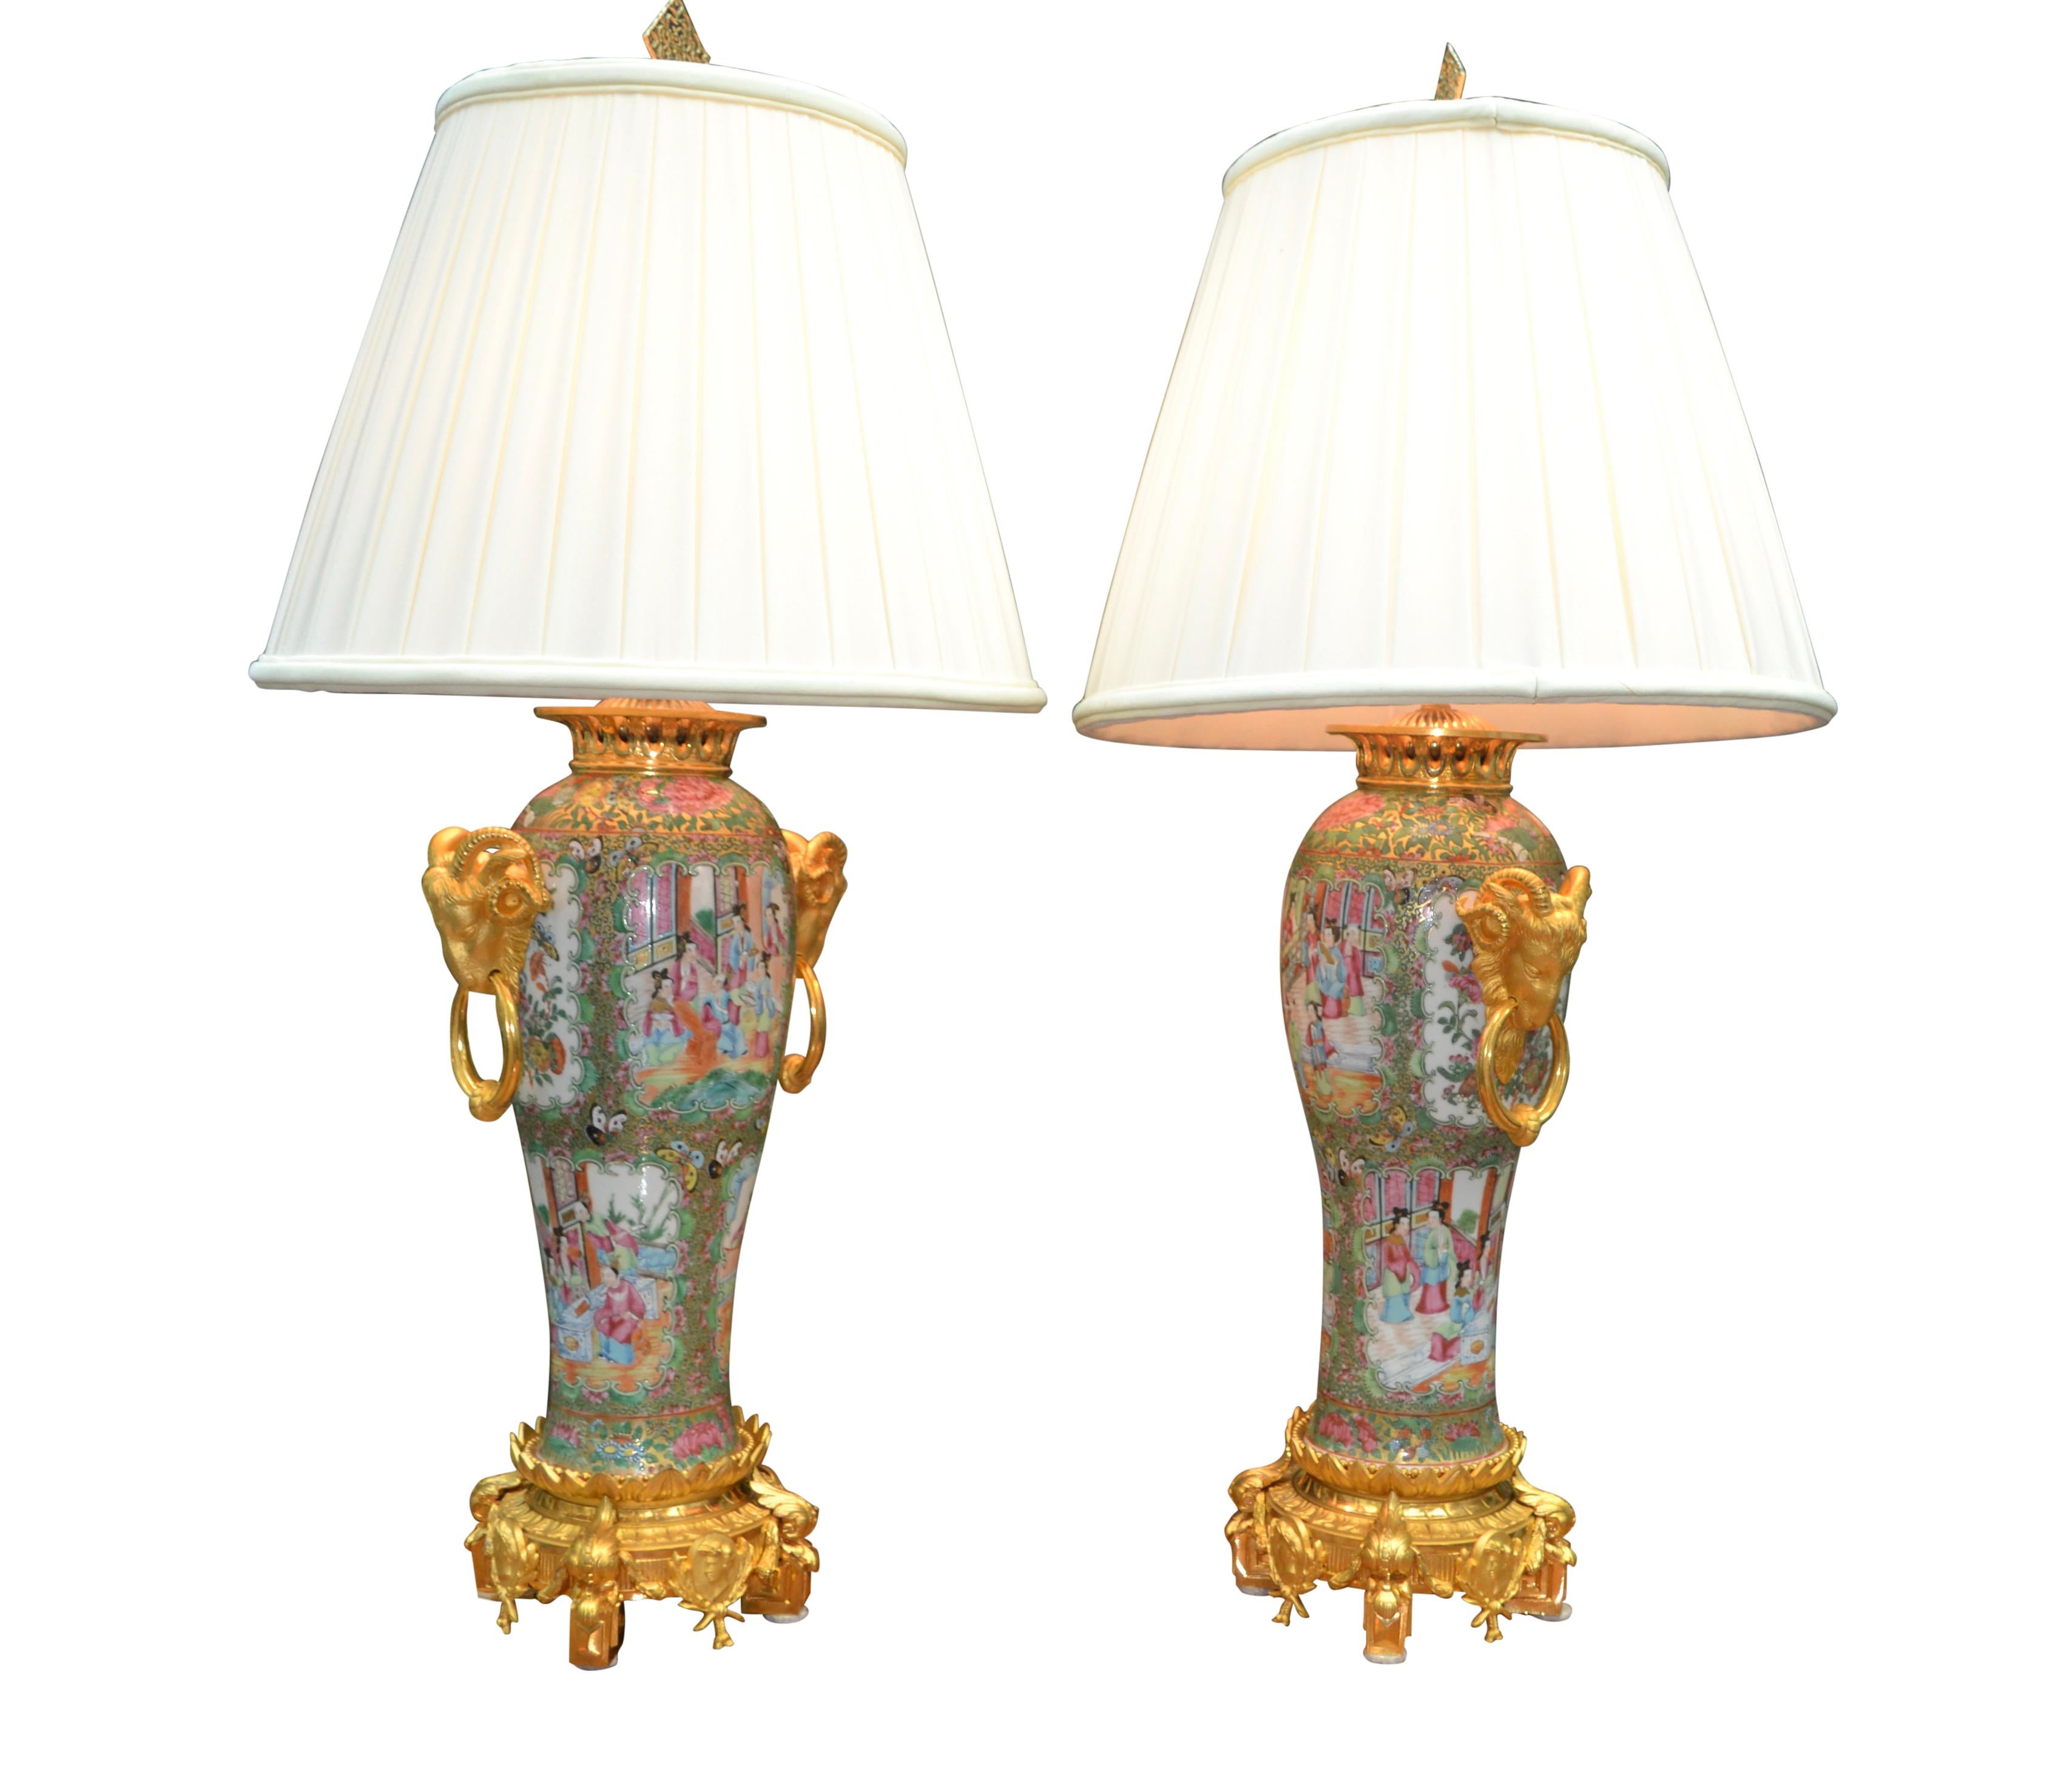 A fine and rare large scale Chinese porcelain and gilt bronze mounted vases converted into lamps. The vases are characterized by hand painted Famille Rose medallion design and richly embellished with finely chased and gilded bronze mounts including